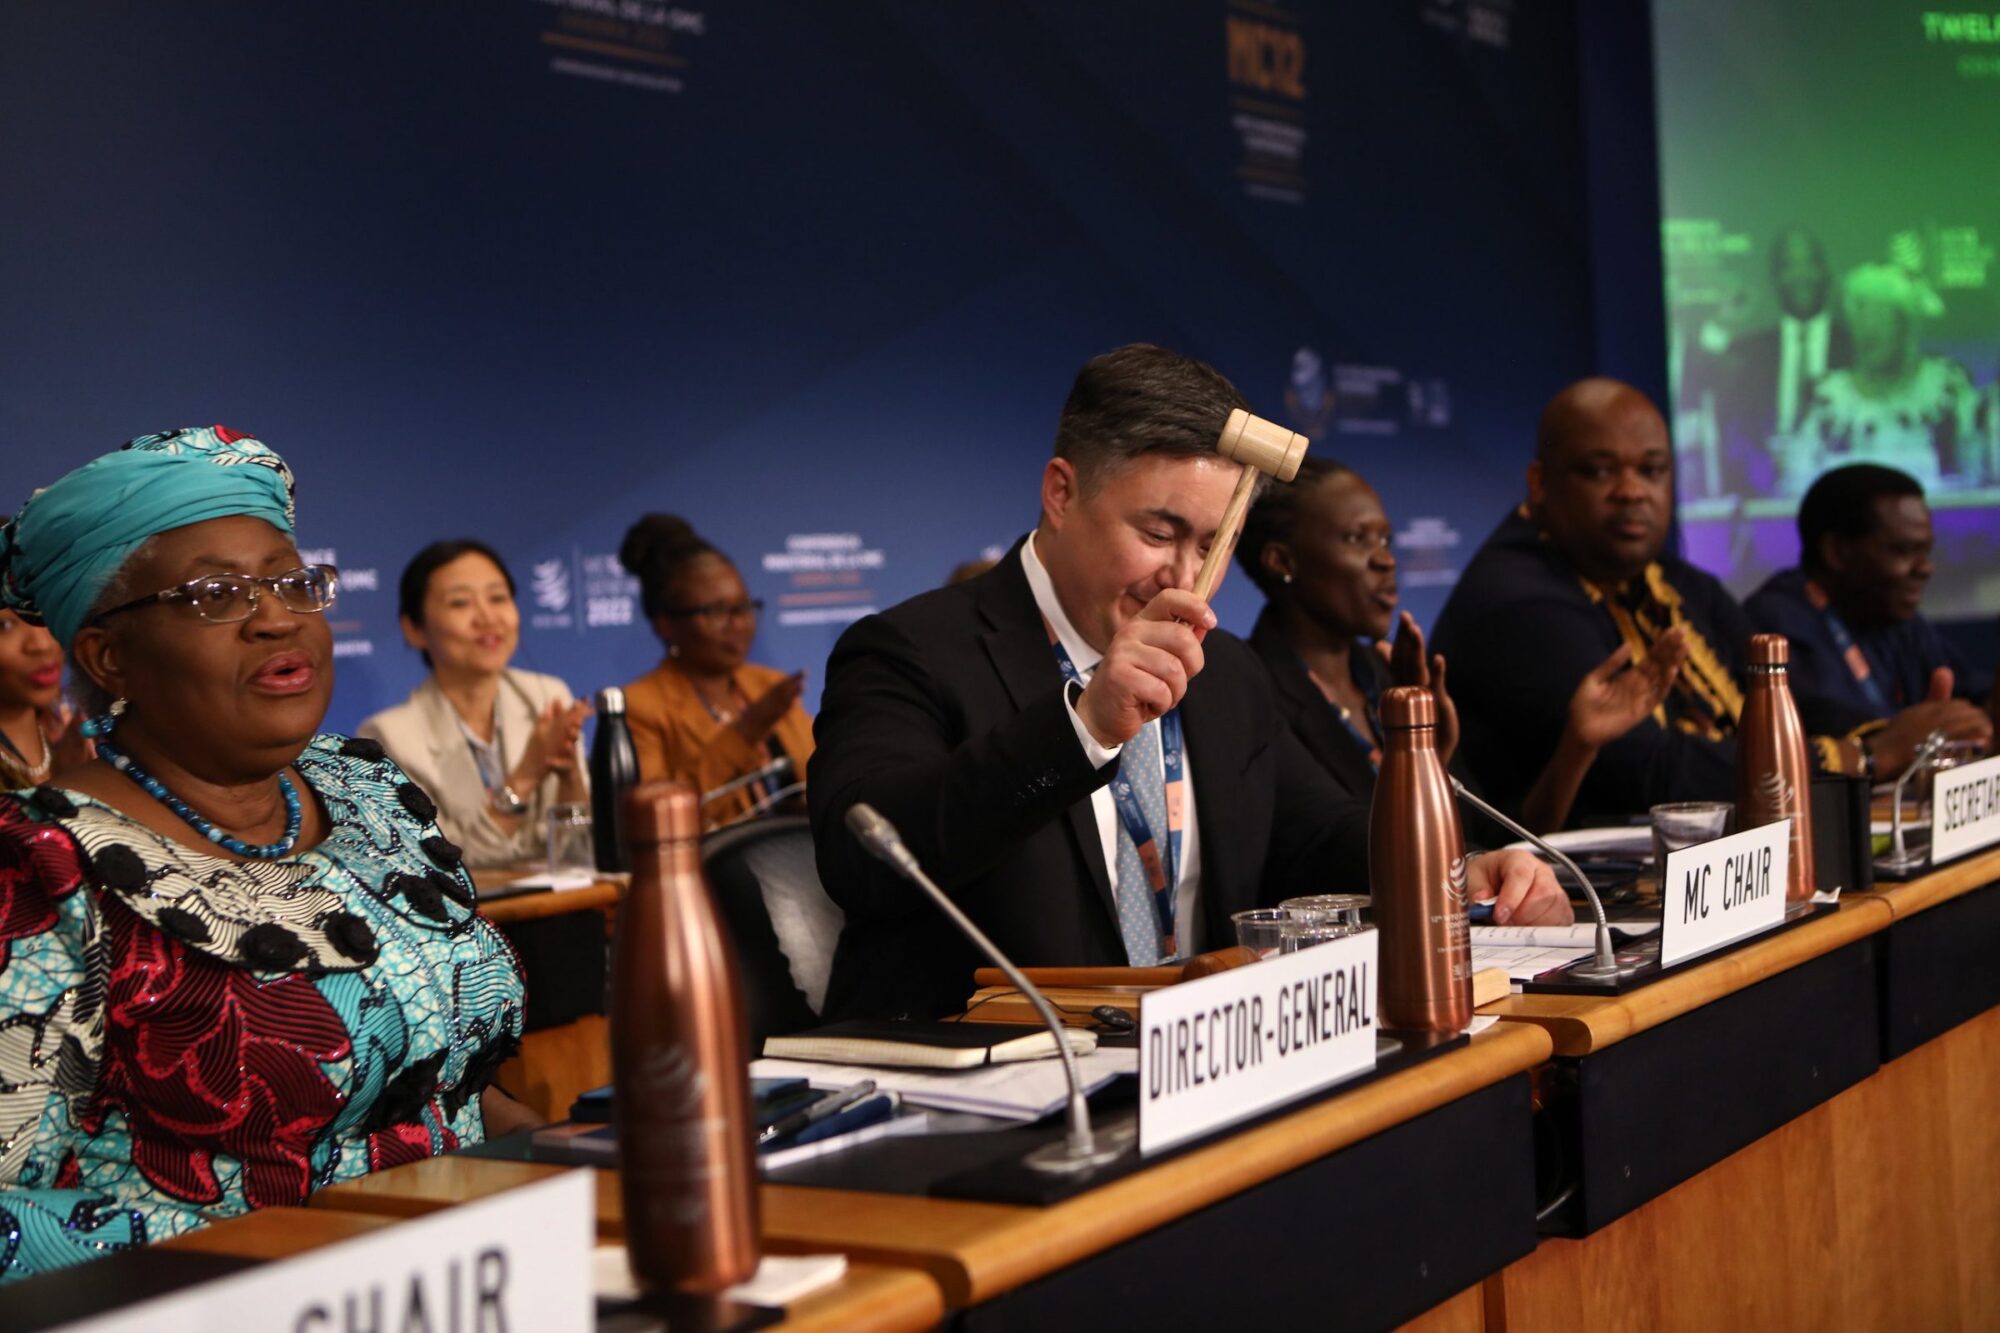 <p>Timur Suleimenov, chair of the World Trade Organization’s 12<sup>th</sup> Ministerial Conference, brings down the gavel to close proceedings after parties agreed a ban on harmful fisheries subsidies, Geneva, 17 June (Image: <a href="https://www.flickr.com/photos/world_trade_organization/">WTO</a> / <a href="https://www.flickr.com/photos/world_trade_organization/52151824762/in/album-72177720299758928/">Jay Louvion</a>, <a href="https://creativecommons.org/licenses/by-sa/2.0/">CC BY-SA 2.0</a>)</p>